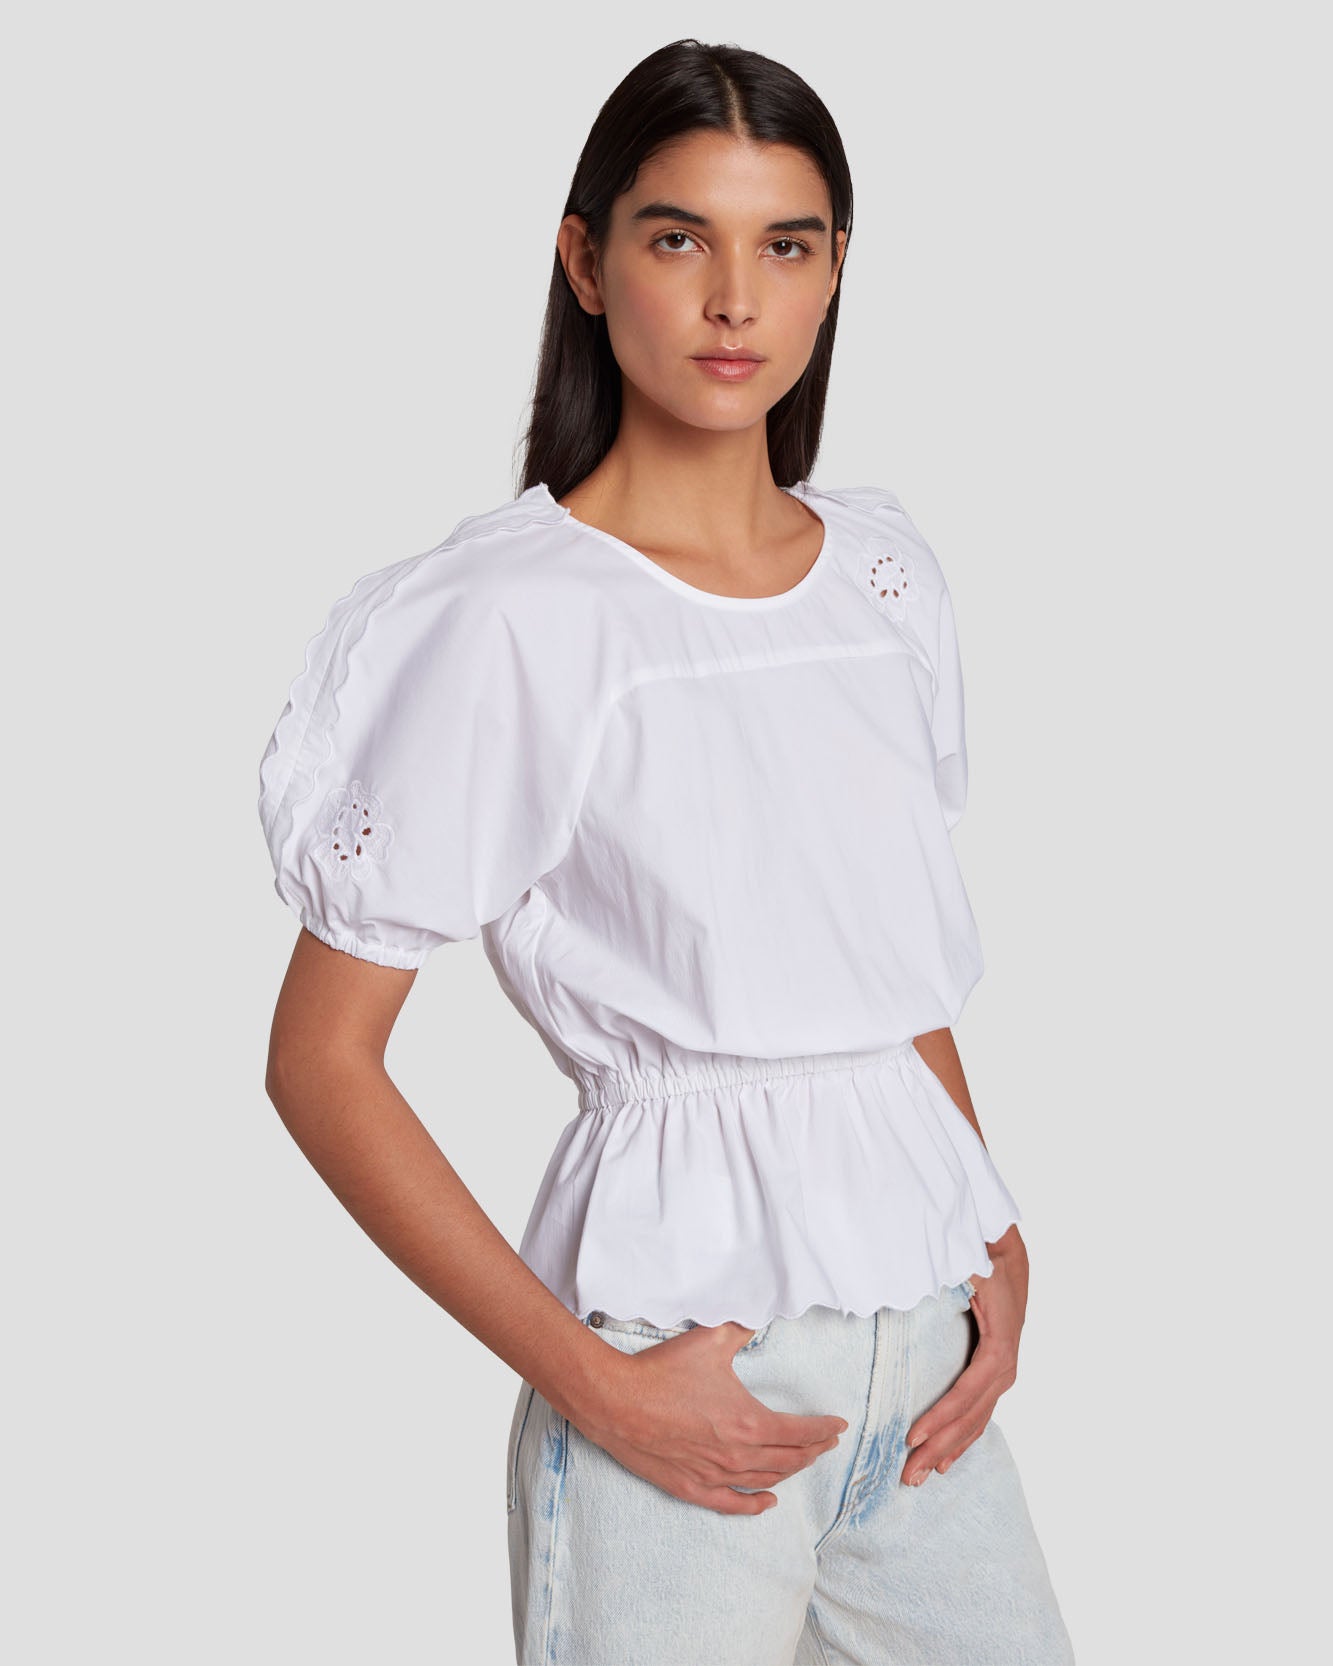 7 For All Mankind Eyelet Top in Bright White 7N569F36BRW